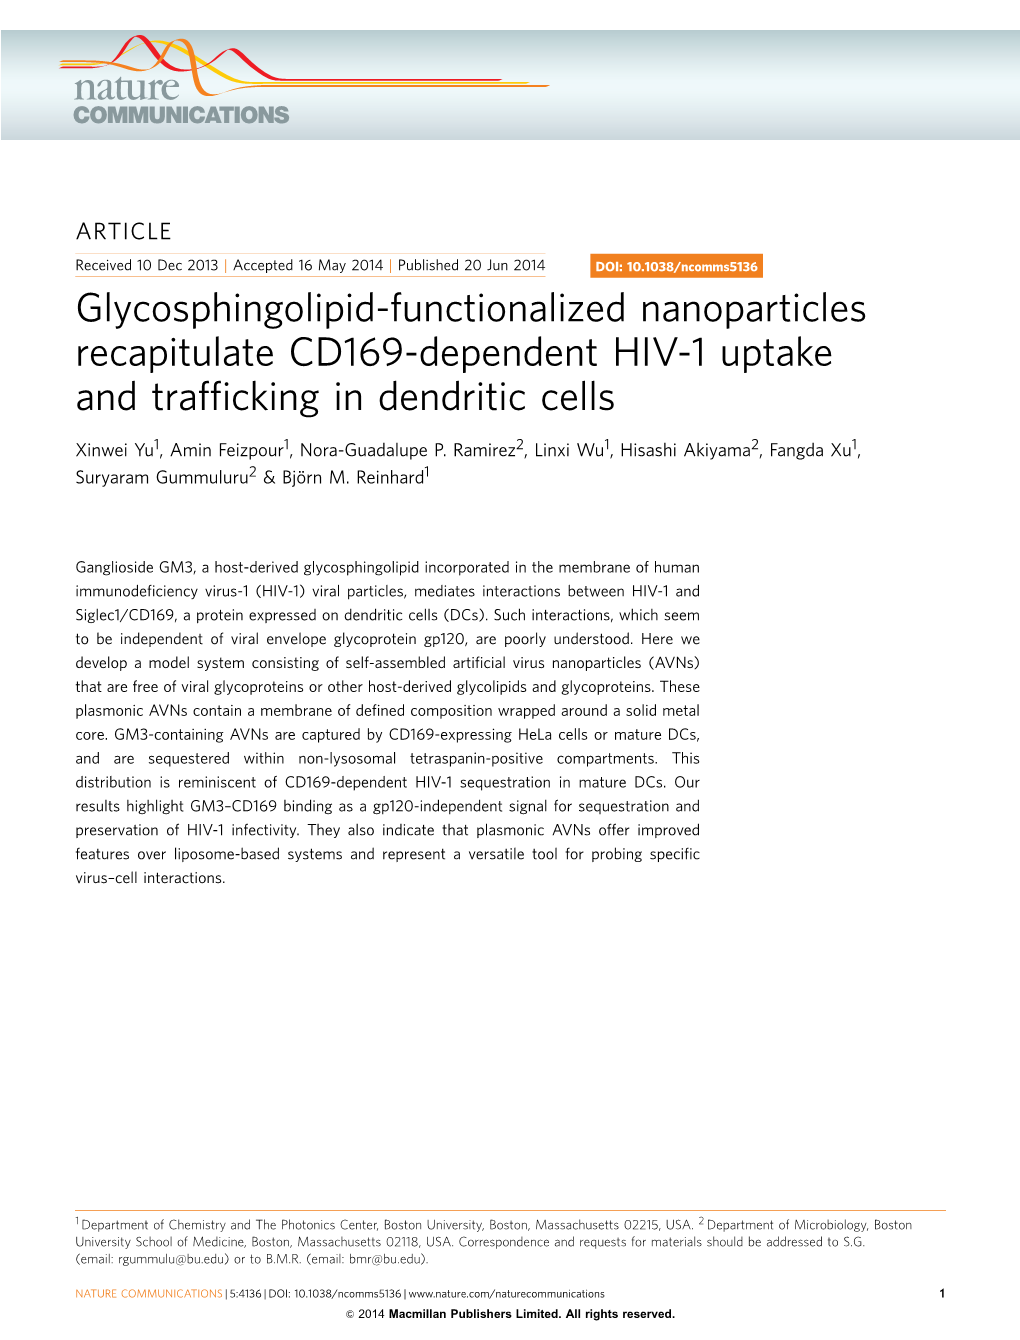 Glycosphingolipid-Functionalized Nanoparticles Recapitulate CD169-Dependent HIV-1 Uptake and Trafﬁcking in Dendritic Cells